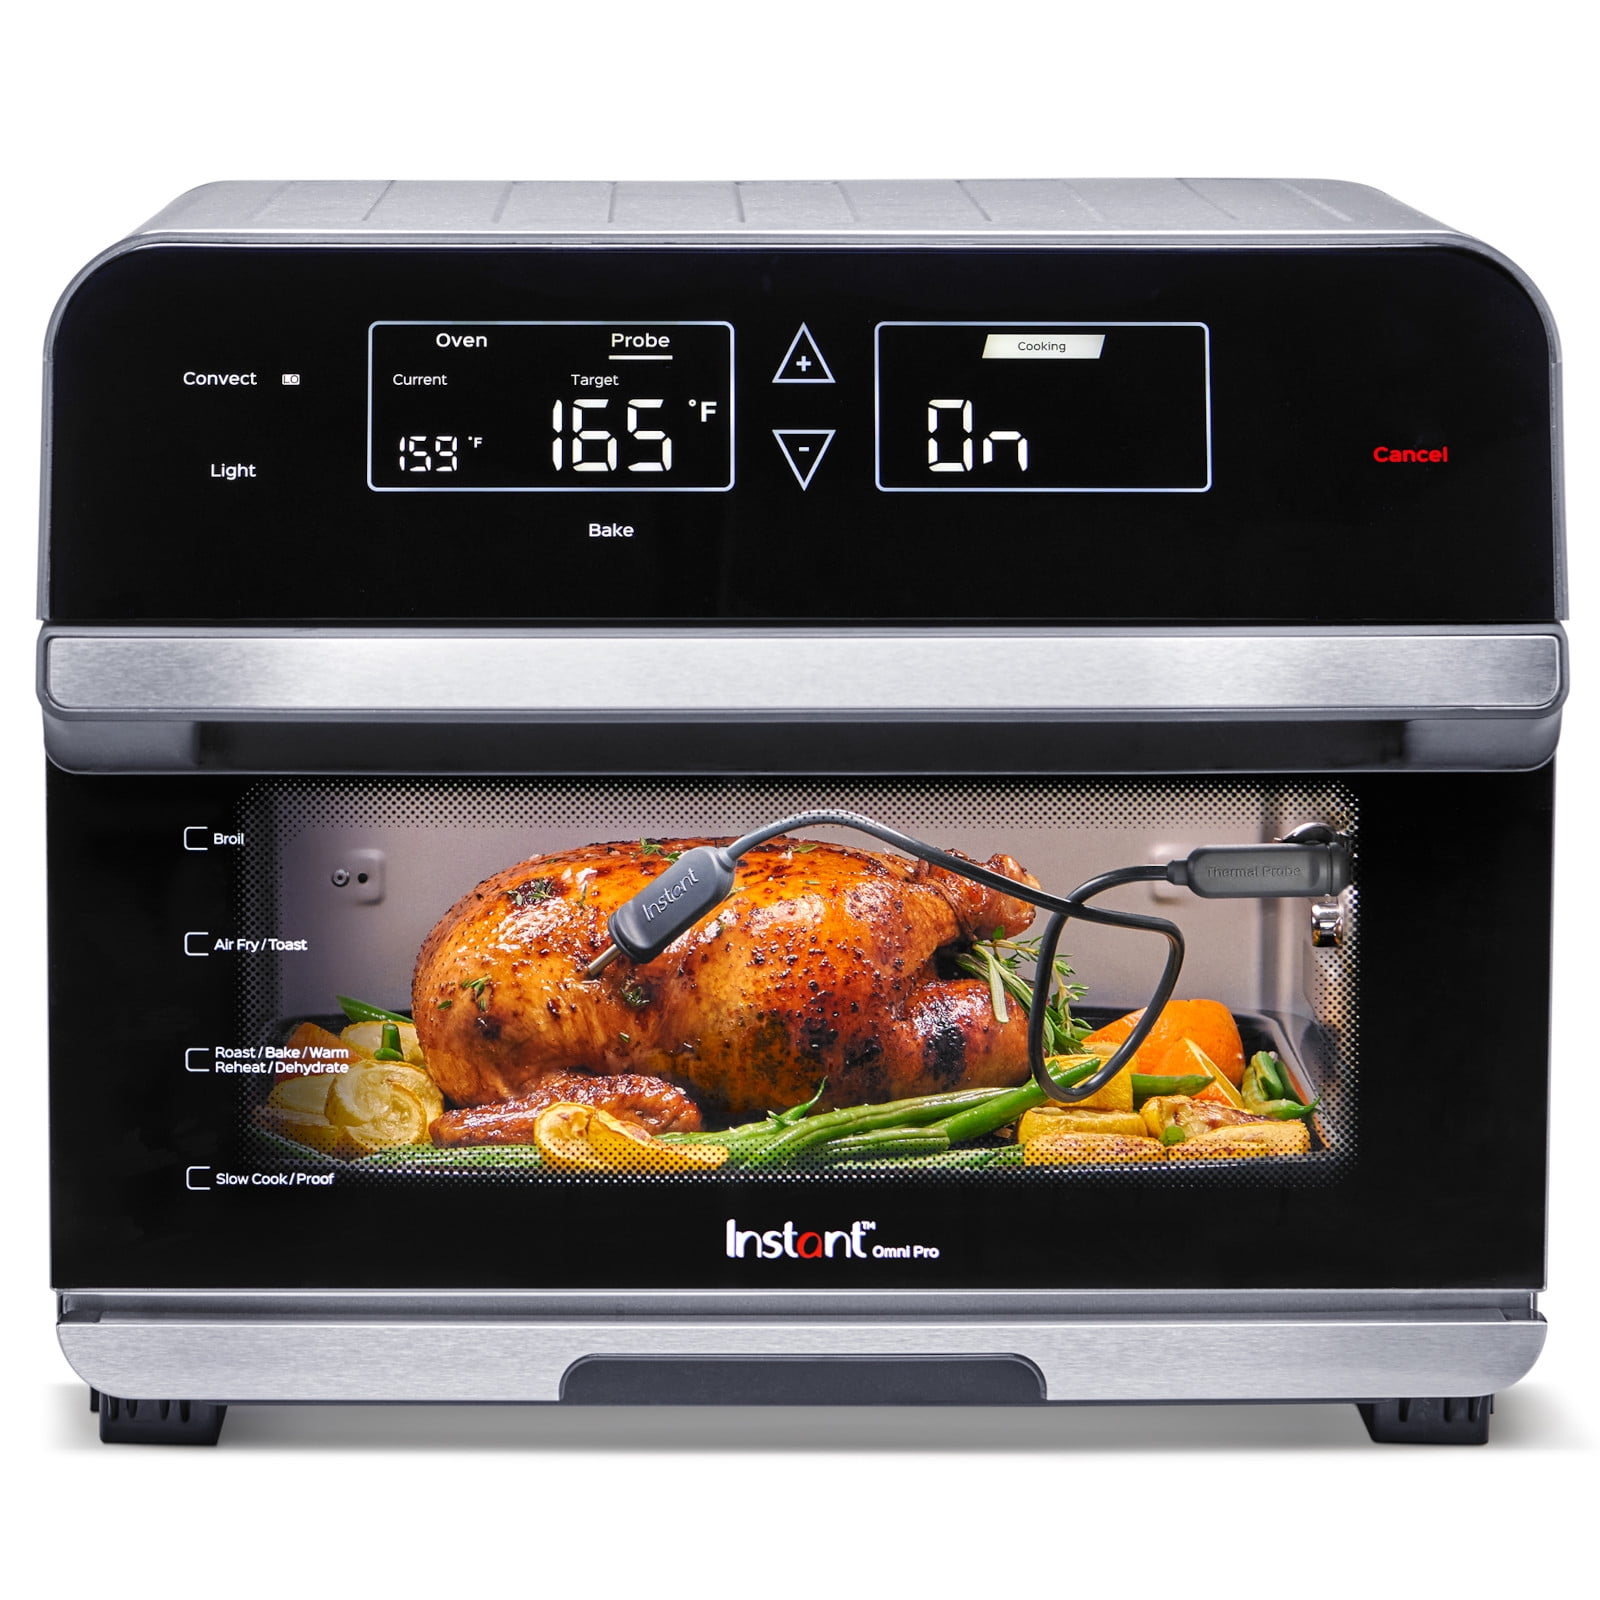 The Instant Omni Plus Air Fryer Toaster Oven Is $50 Off Ahead of